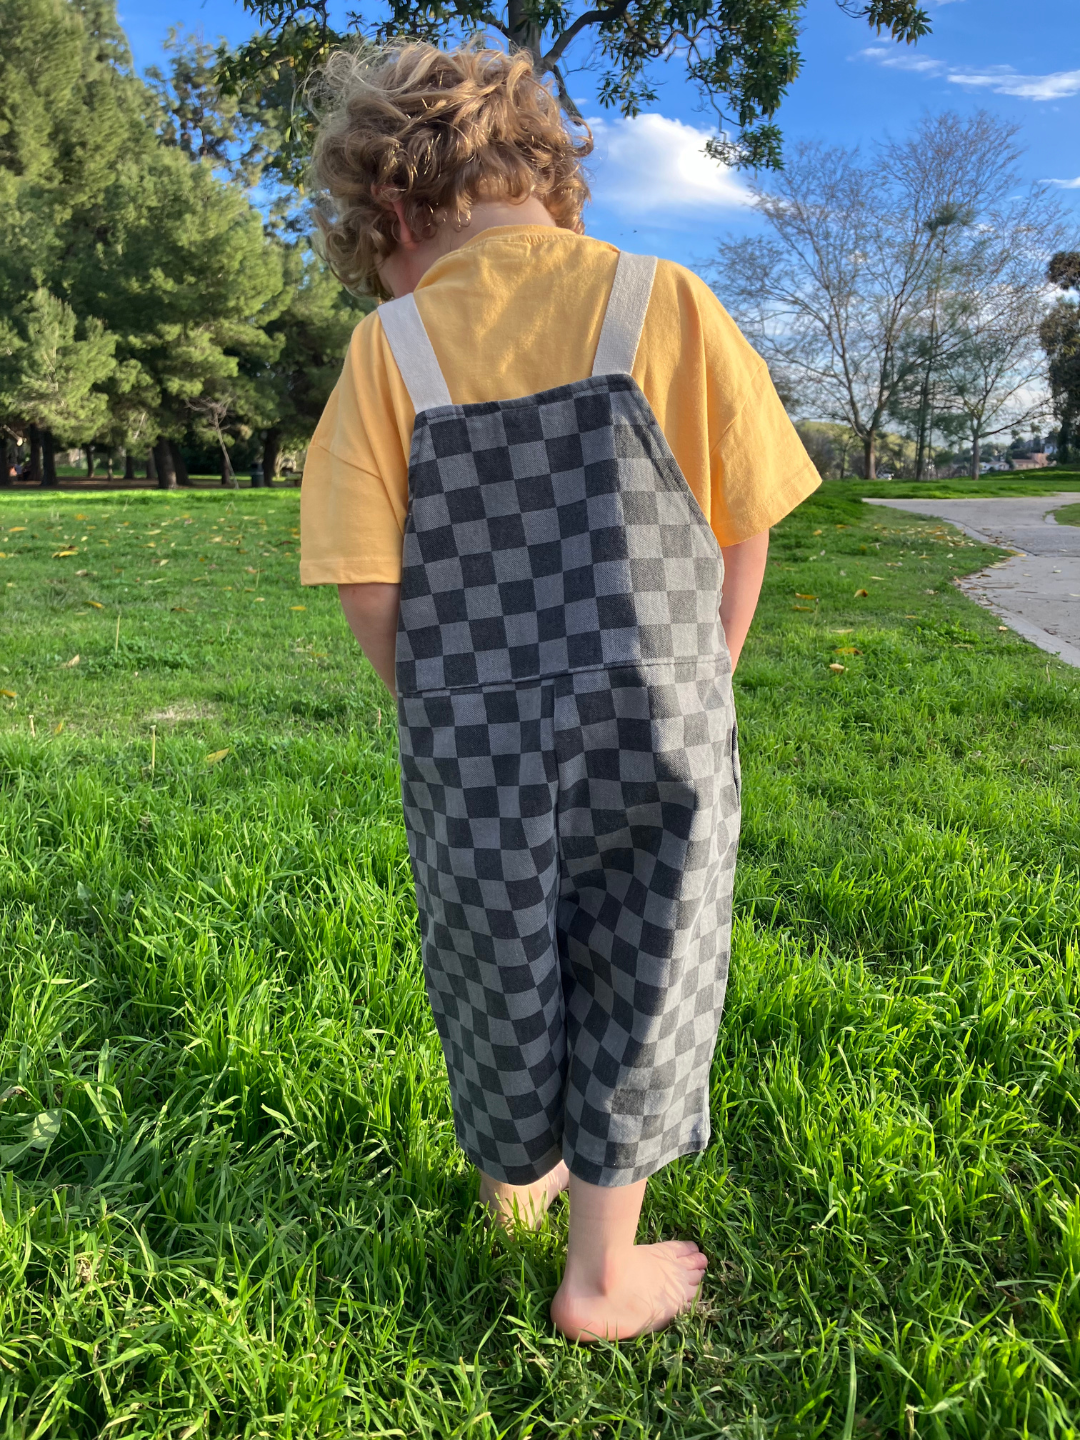 A child is wearing checker overalls in charcoal over a yellow tee